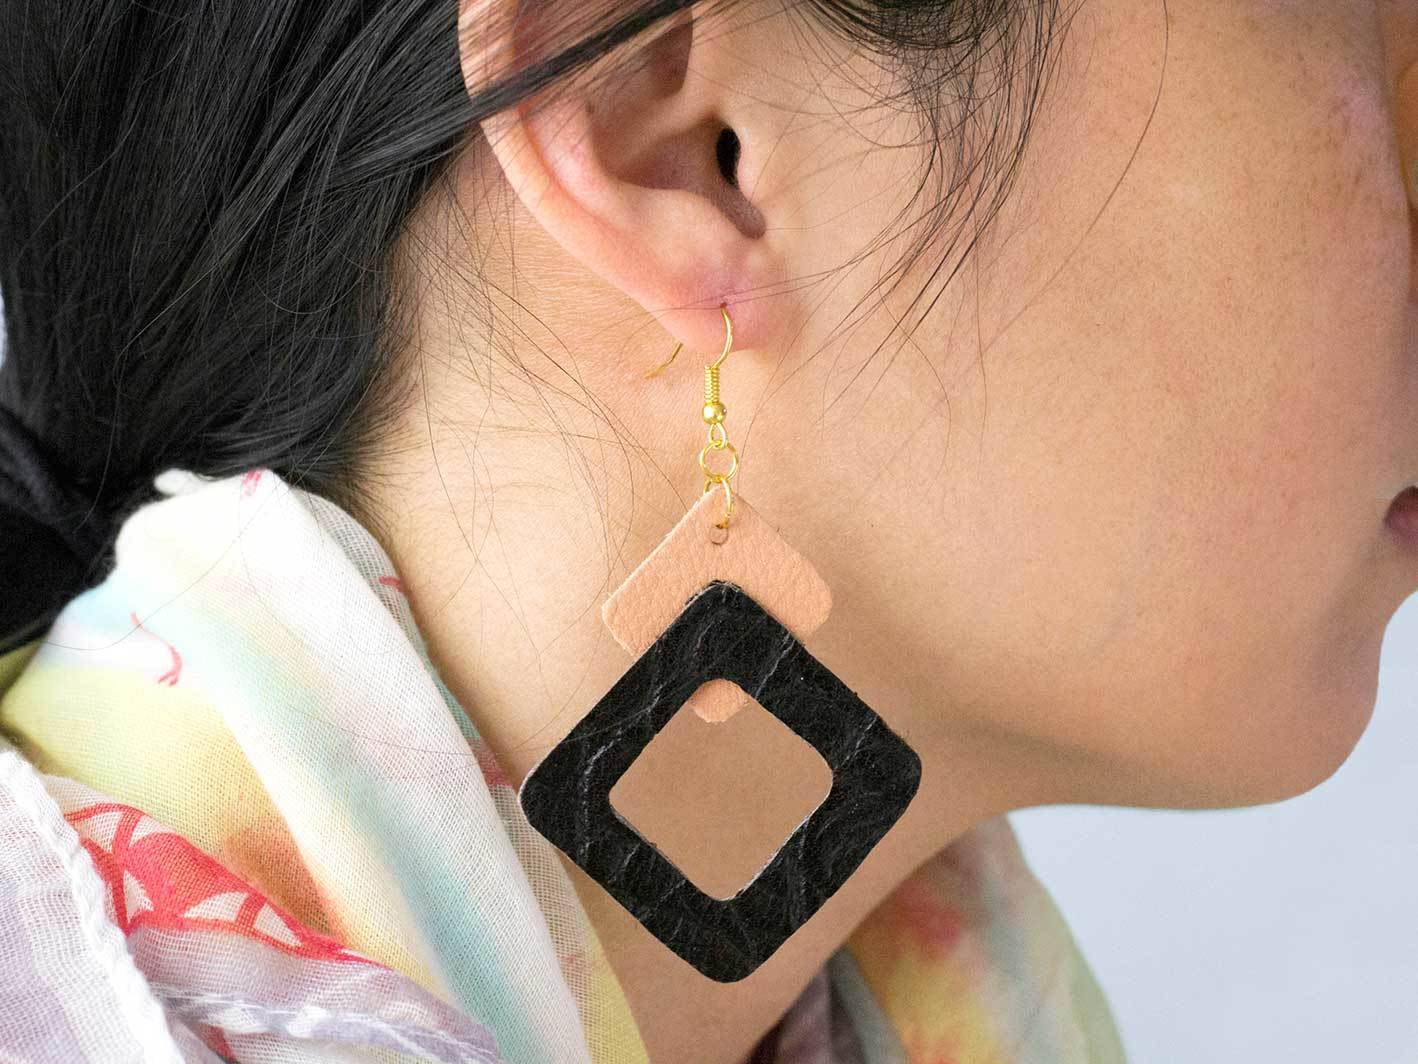 DIY leather earrings - the perfect Christmas gift that won't break the bank